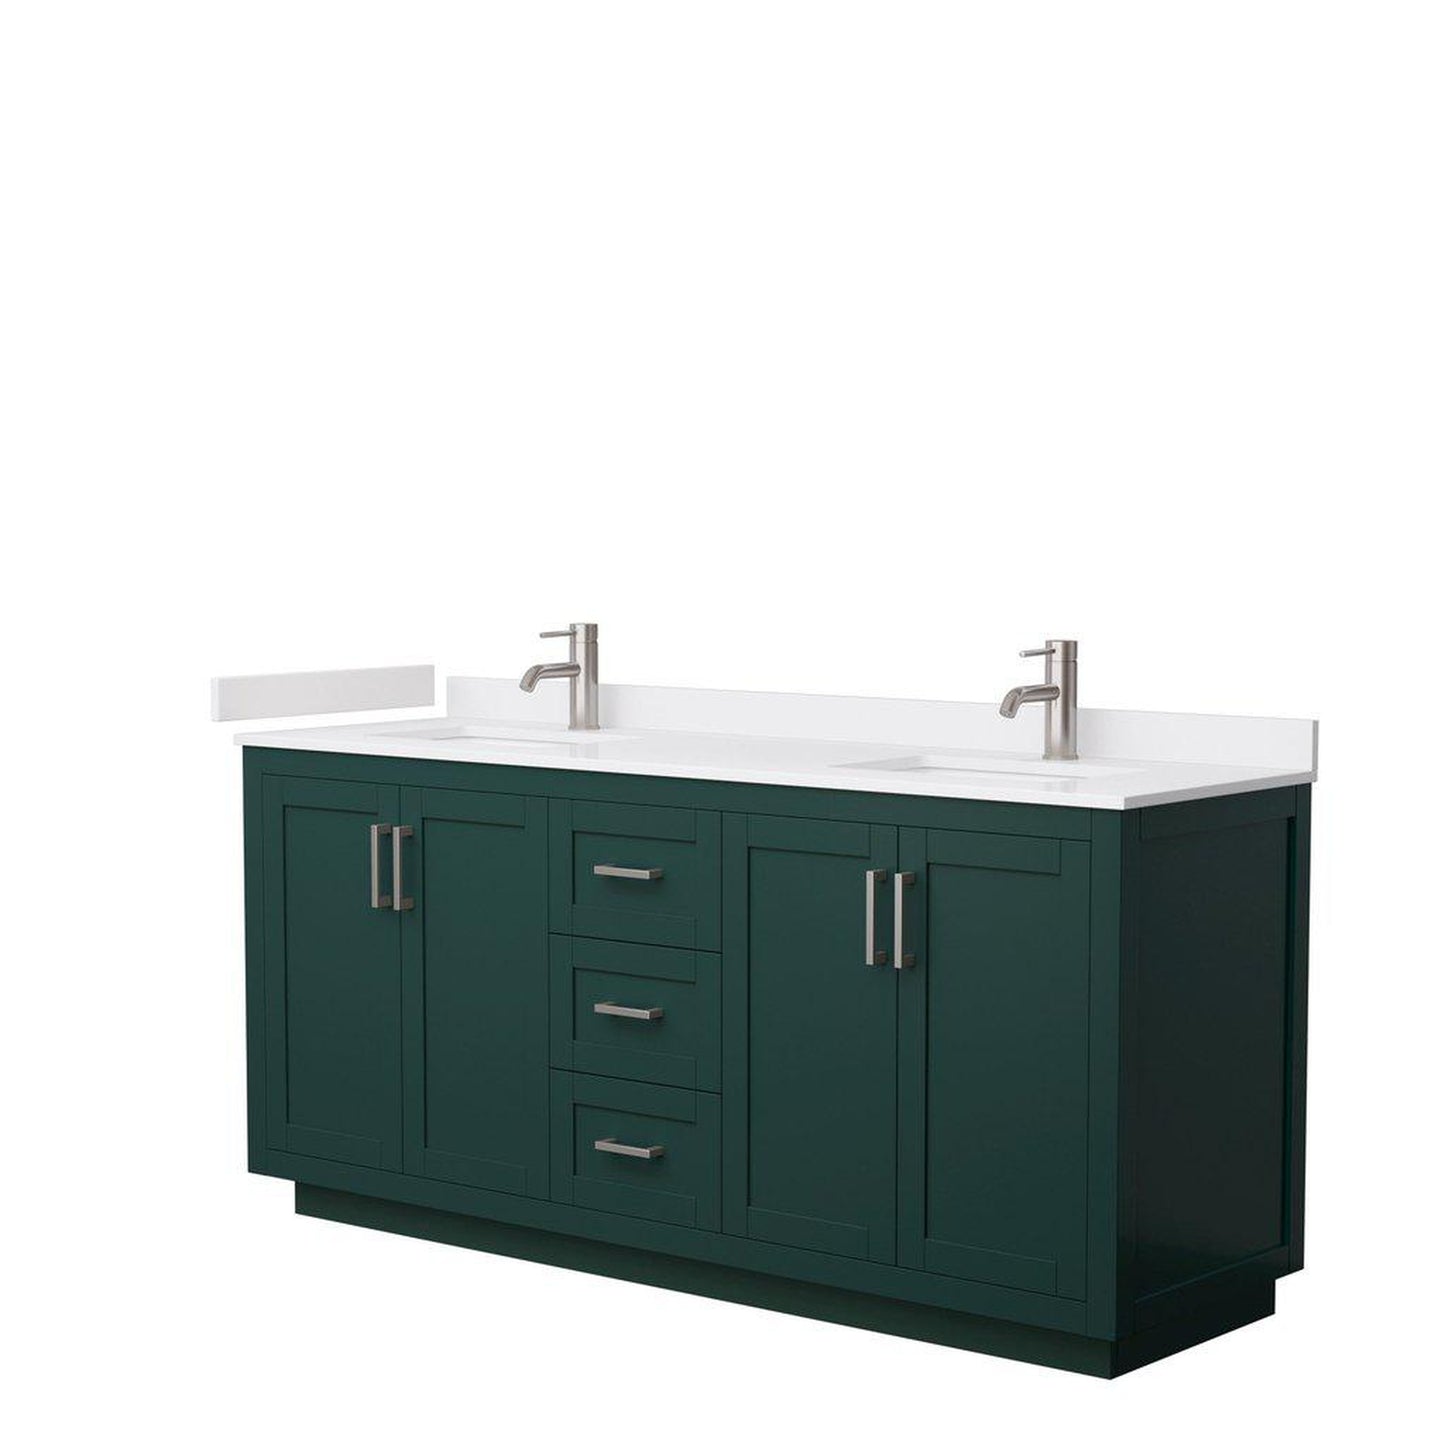 Wyndham Collection Miranda 72" Double Bathroom Green Vanity Set With White Cultured Marble Countertop, Undermount Square Sink, And Brushed Nickel Trim